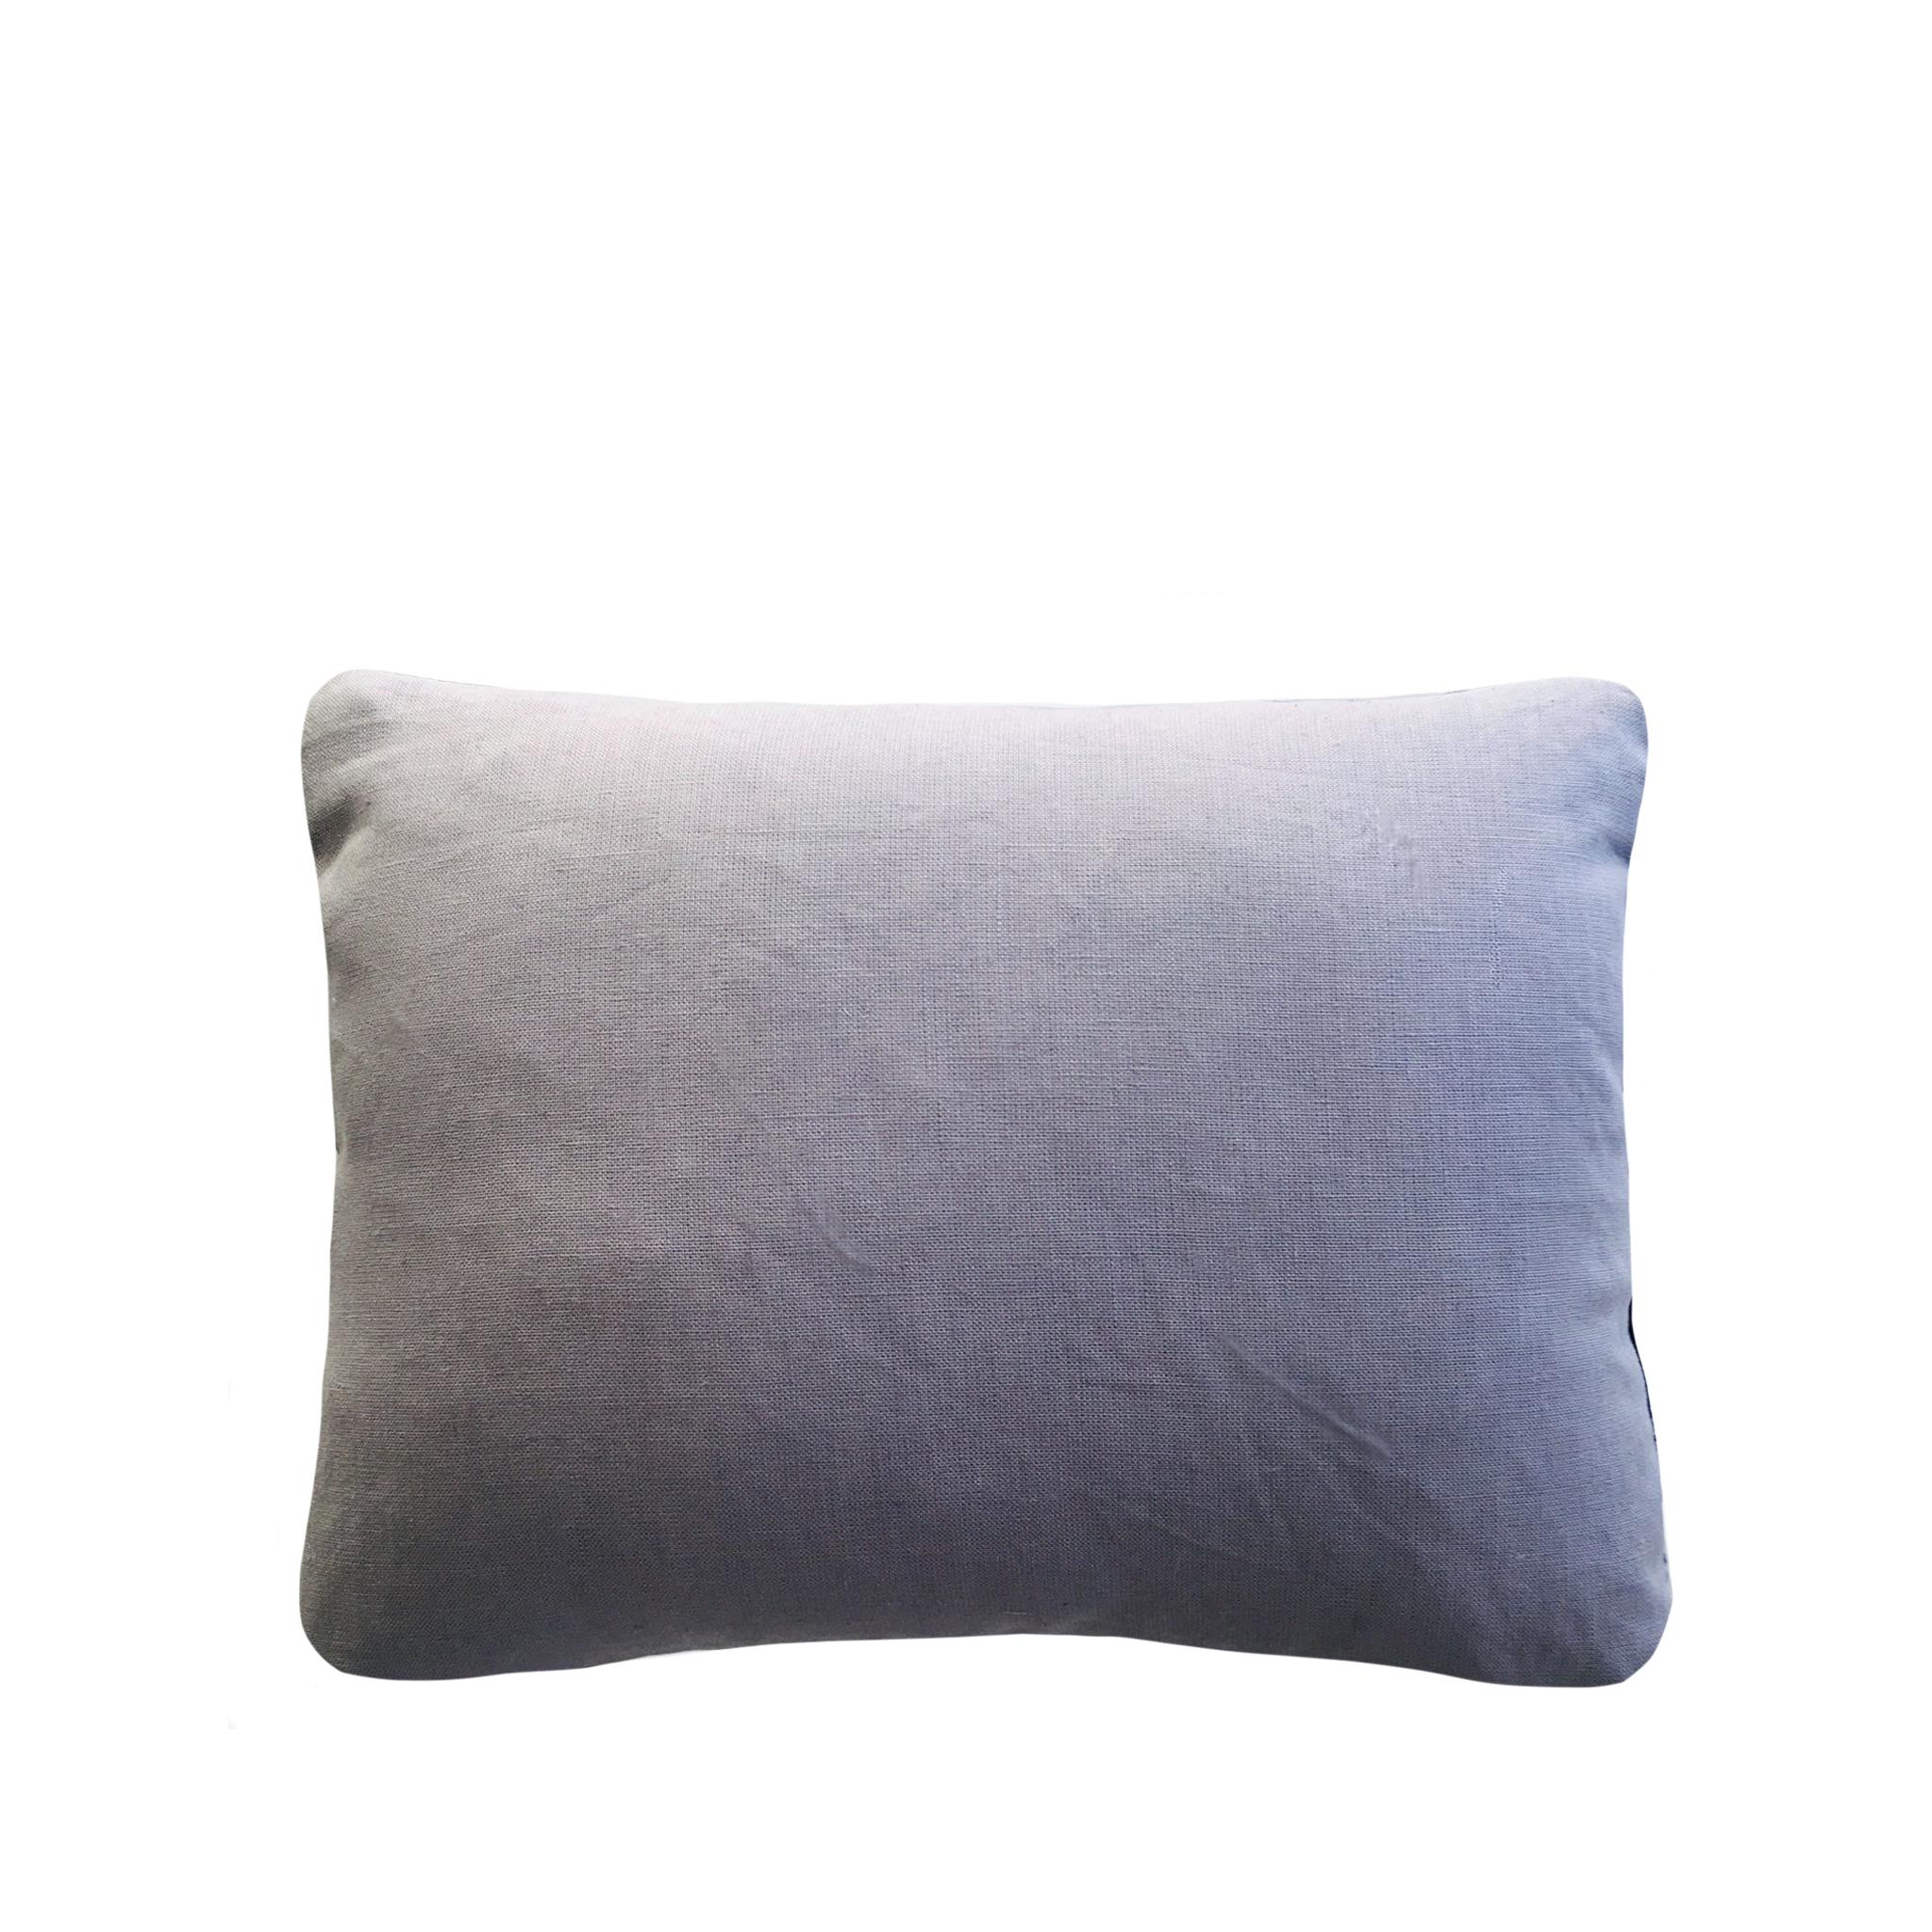 Only one piece made in this design, available only through 1st Dibs!

Rose velvet cushion dyed with indigo in Morse pattern with grey linen backing, invisible zip closure at bottom.

Hand-dyed and sewn in New York City.

Pillow measures 12 x 16